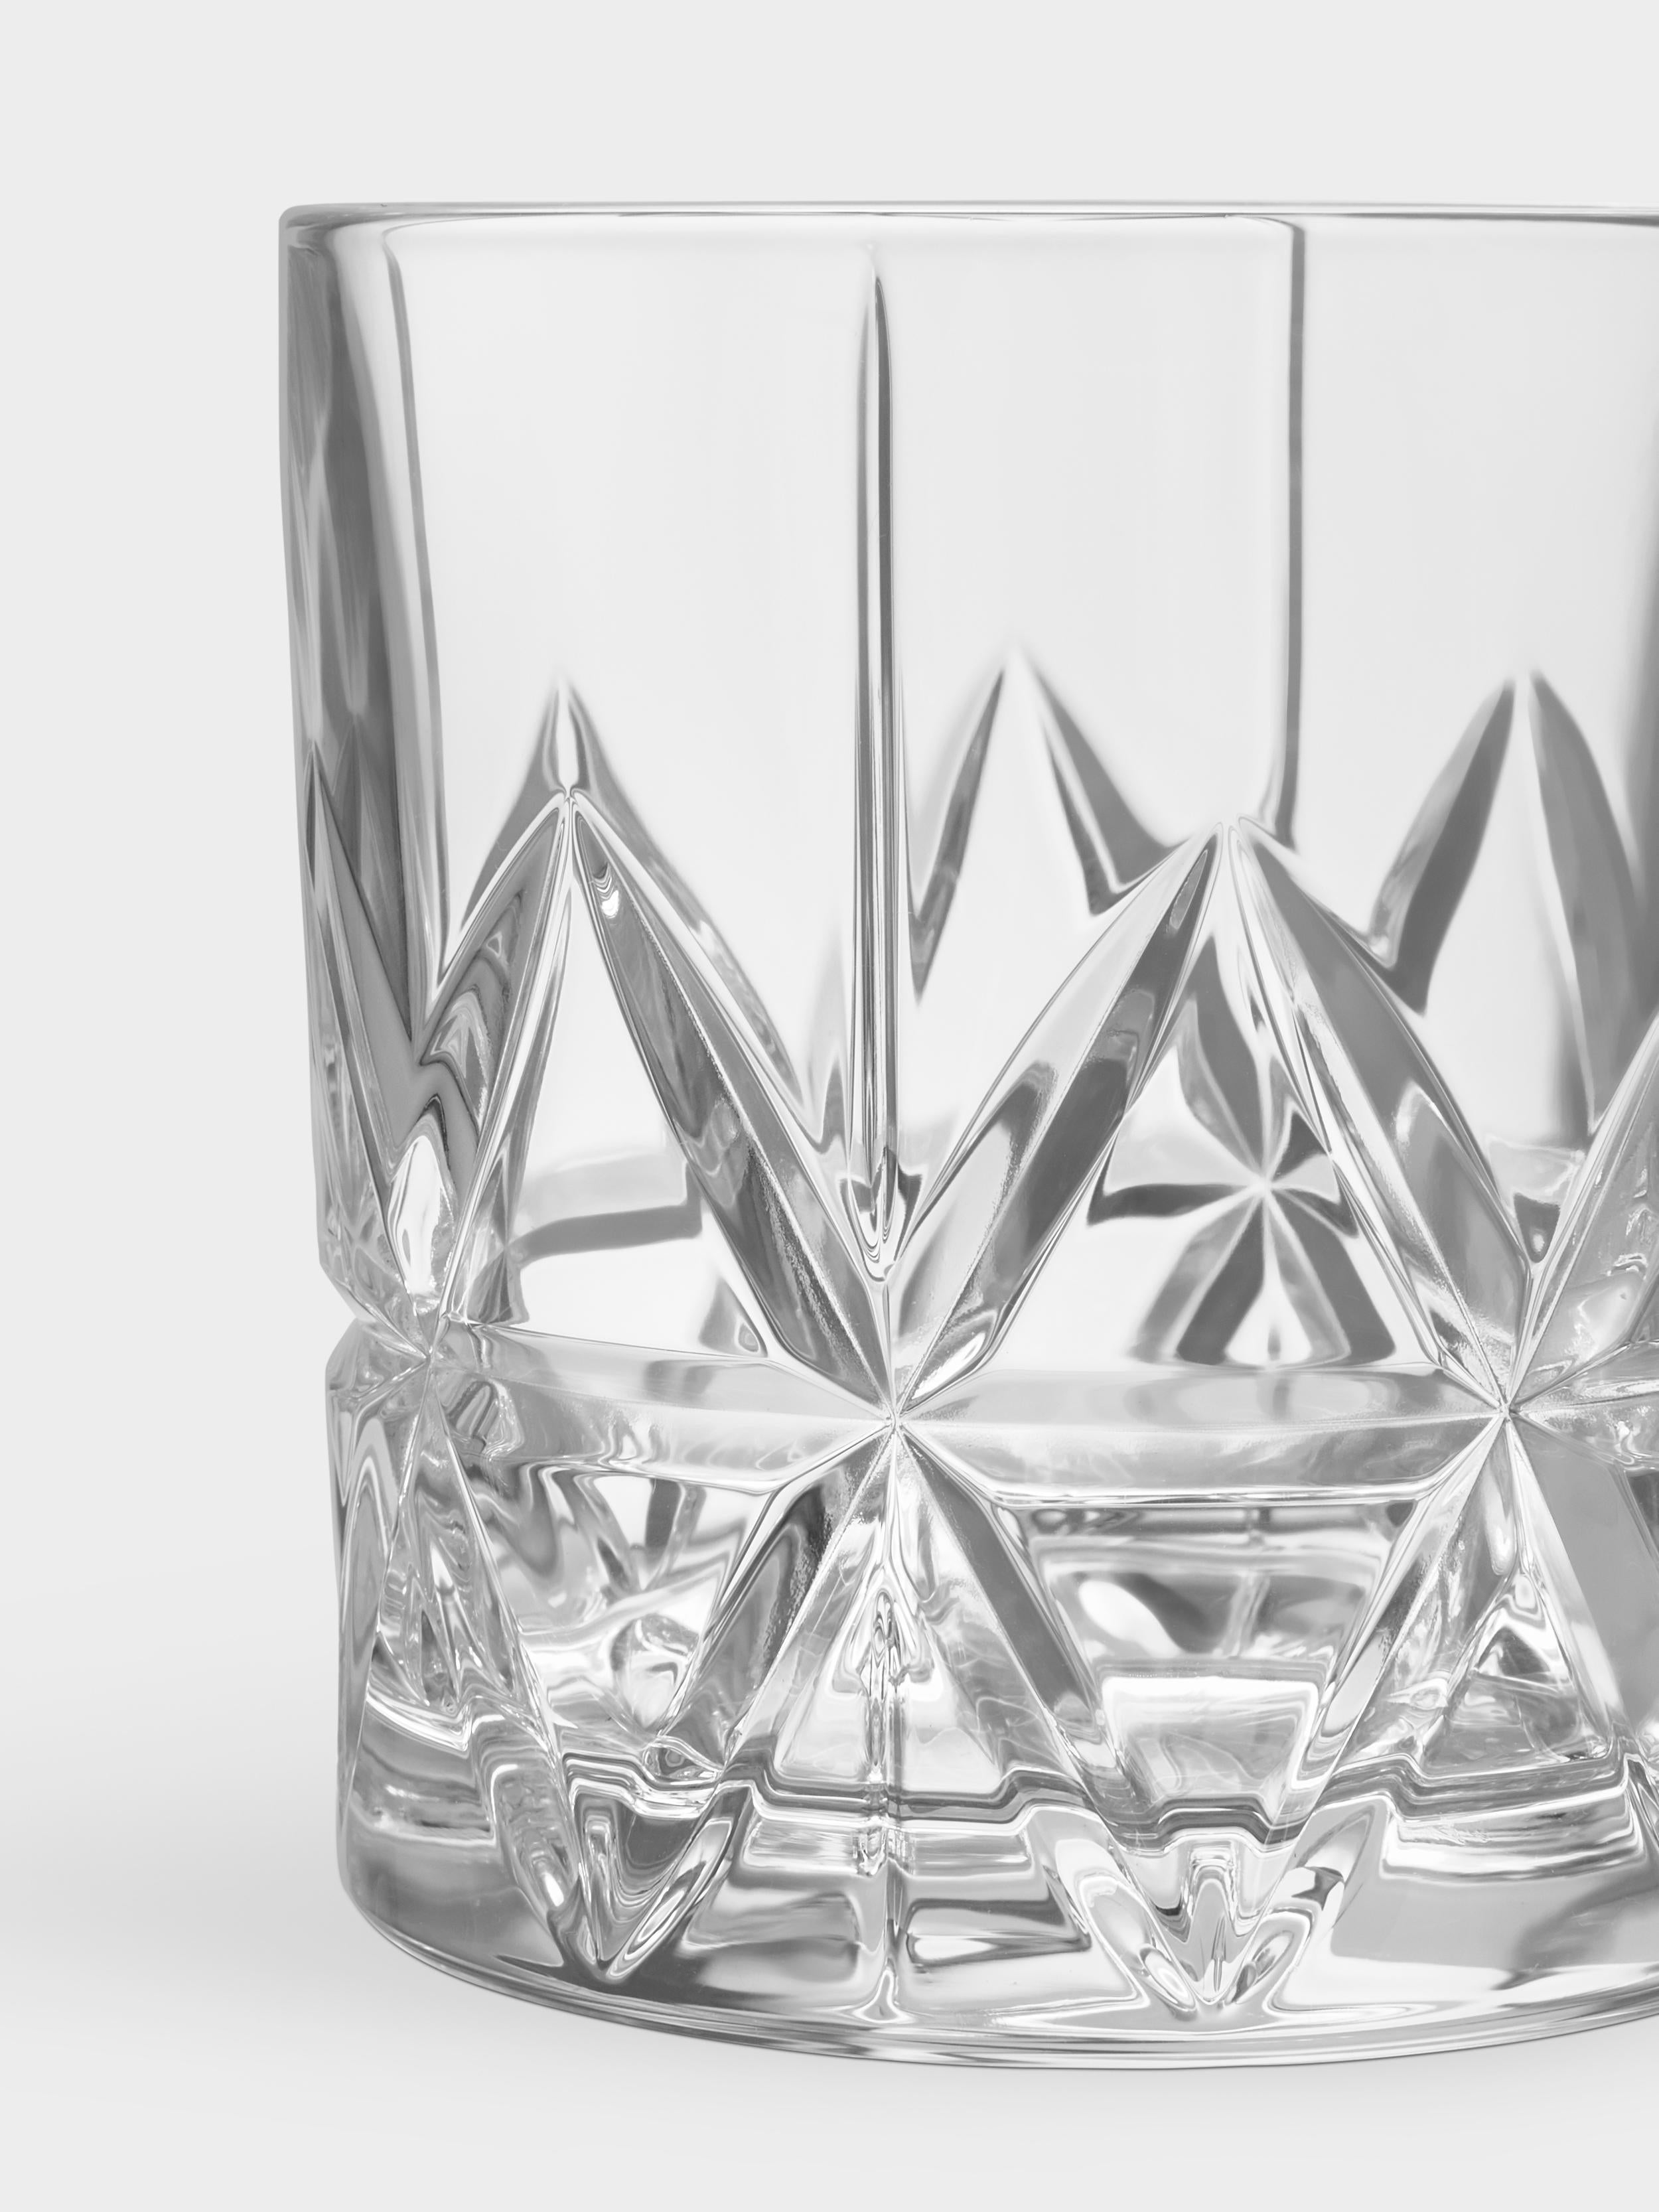 Peak Double Old Fashioned from Orrefors, which holds 11.5 oz, is an ideal bar glass for spirits and cocktails. The motif on the glass is inspired by the majestic mountain peaks from the northern regions of Scandinavia. Designed by Martti Rytkönen.
